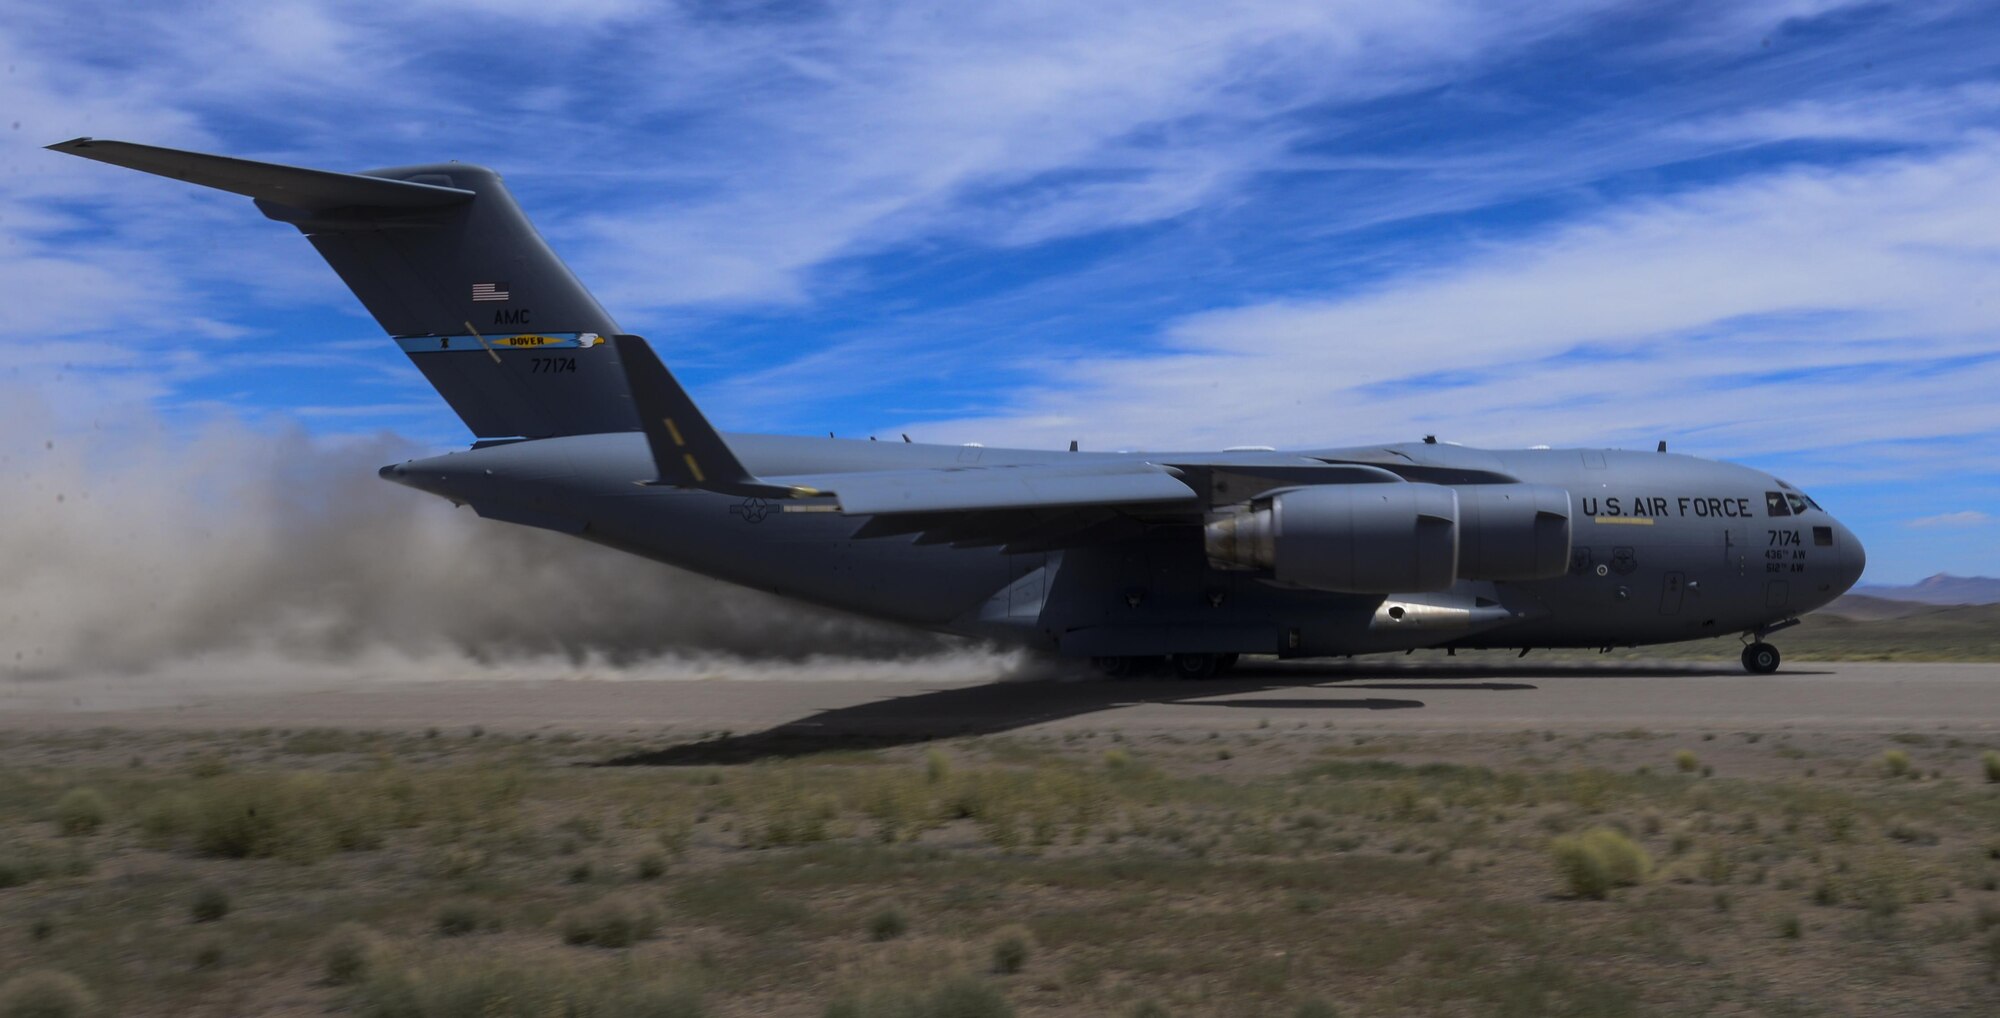 A C-17 Globemaster III, assigned to the 17th Weapons Squadron, Nellis Air Force Base, Nevada, lands on an airstrip in the Nevada Test and Training Range during Joint Forcible Entry Exercise, June 16, 2016. During the Joint Forcible Entry exercise, pilots’ flying skill and decision making was tested in the execution of various missions in a contested environment. (U.S. Air Force photo by Airman 1st Class Kevin Tanenbaum)